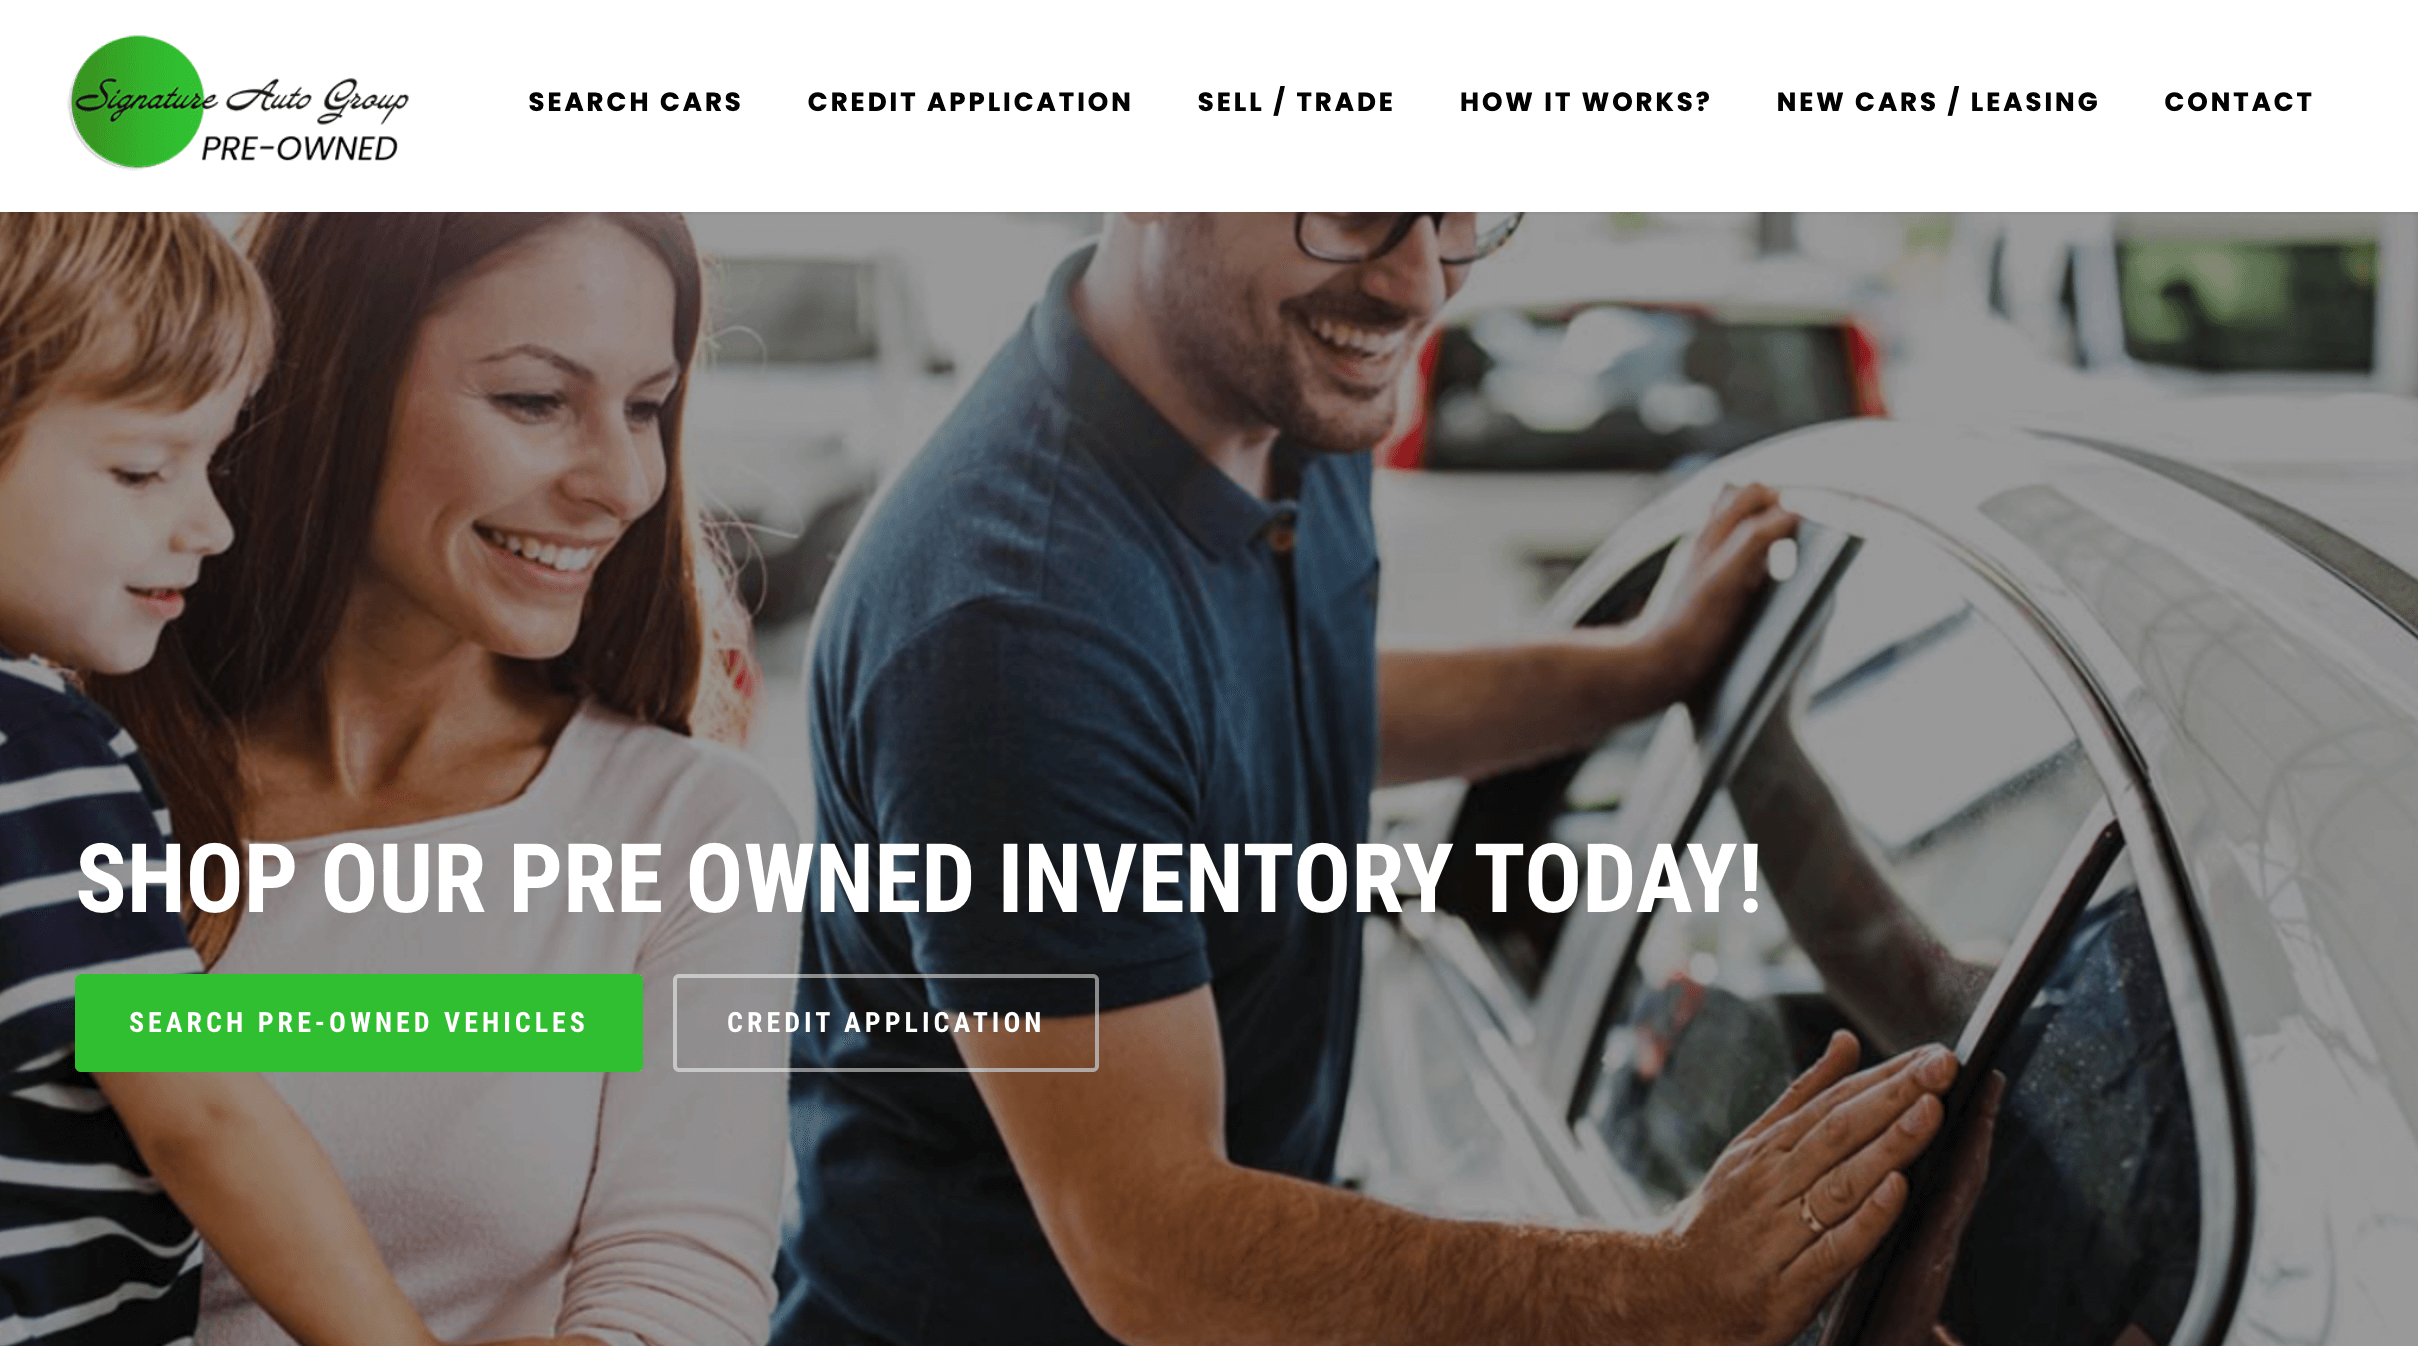 Signature Auto Group Launches A Fully Online Pre-Owned Car Shopping Website